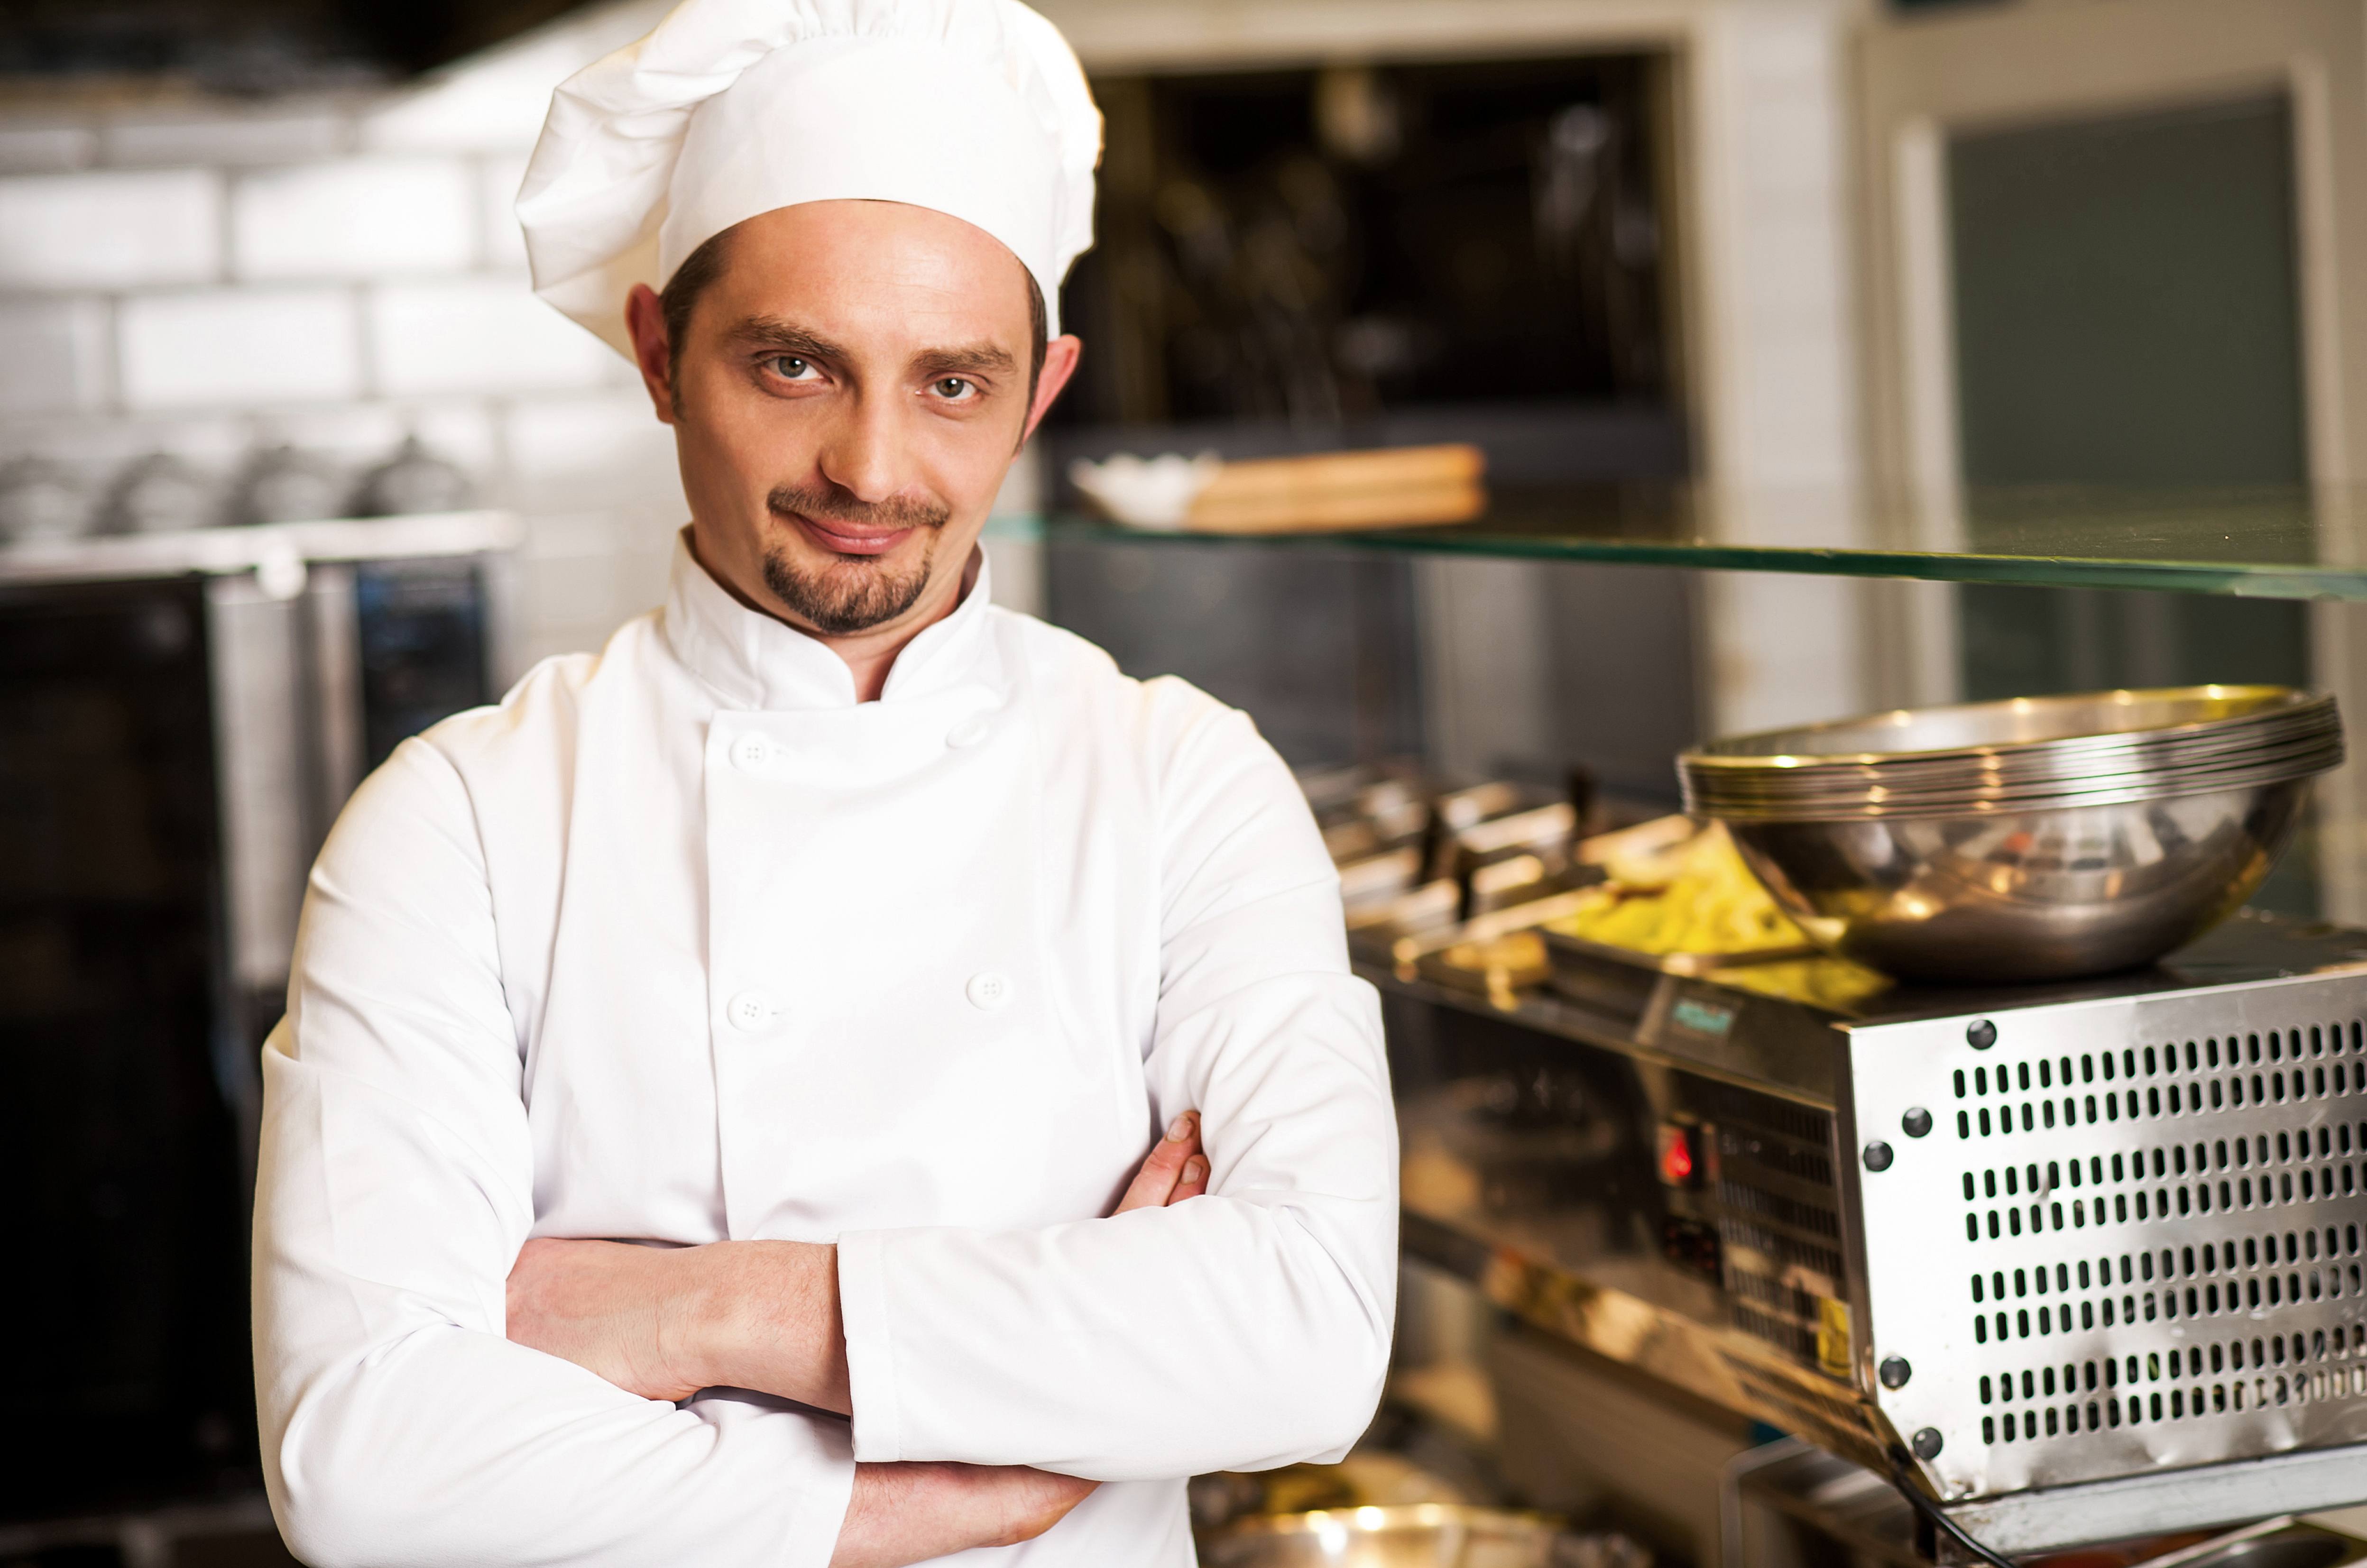 20 Life Lessons Everyone Should Learn from Chefs